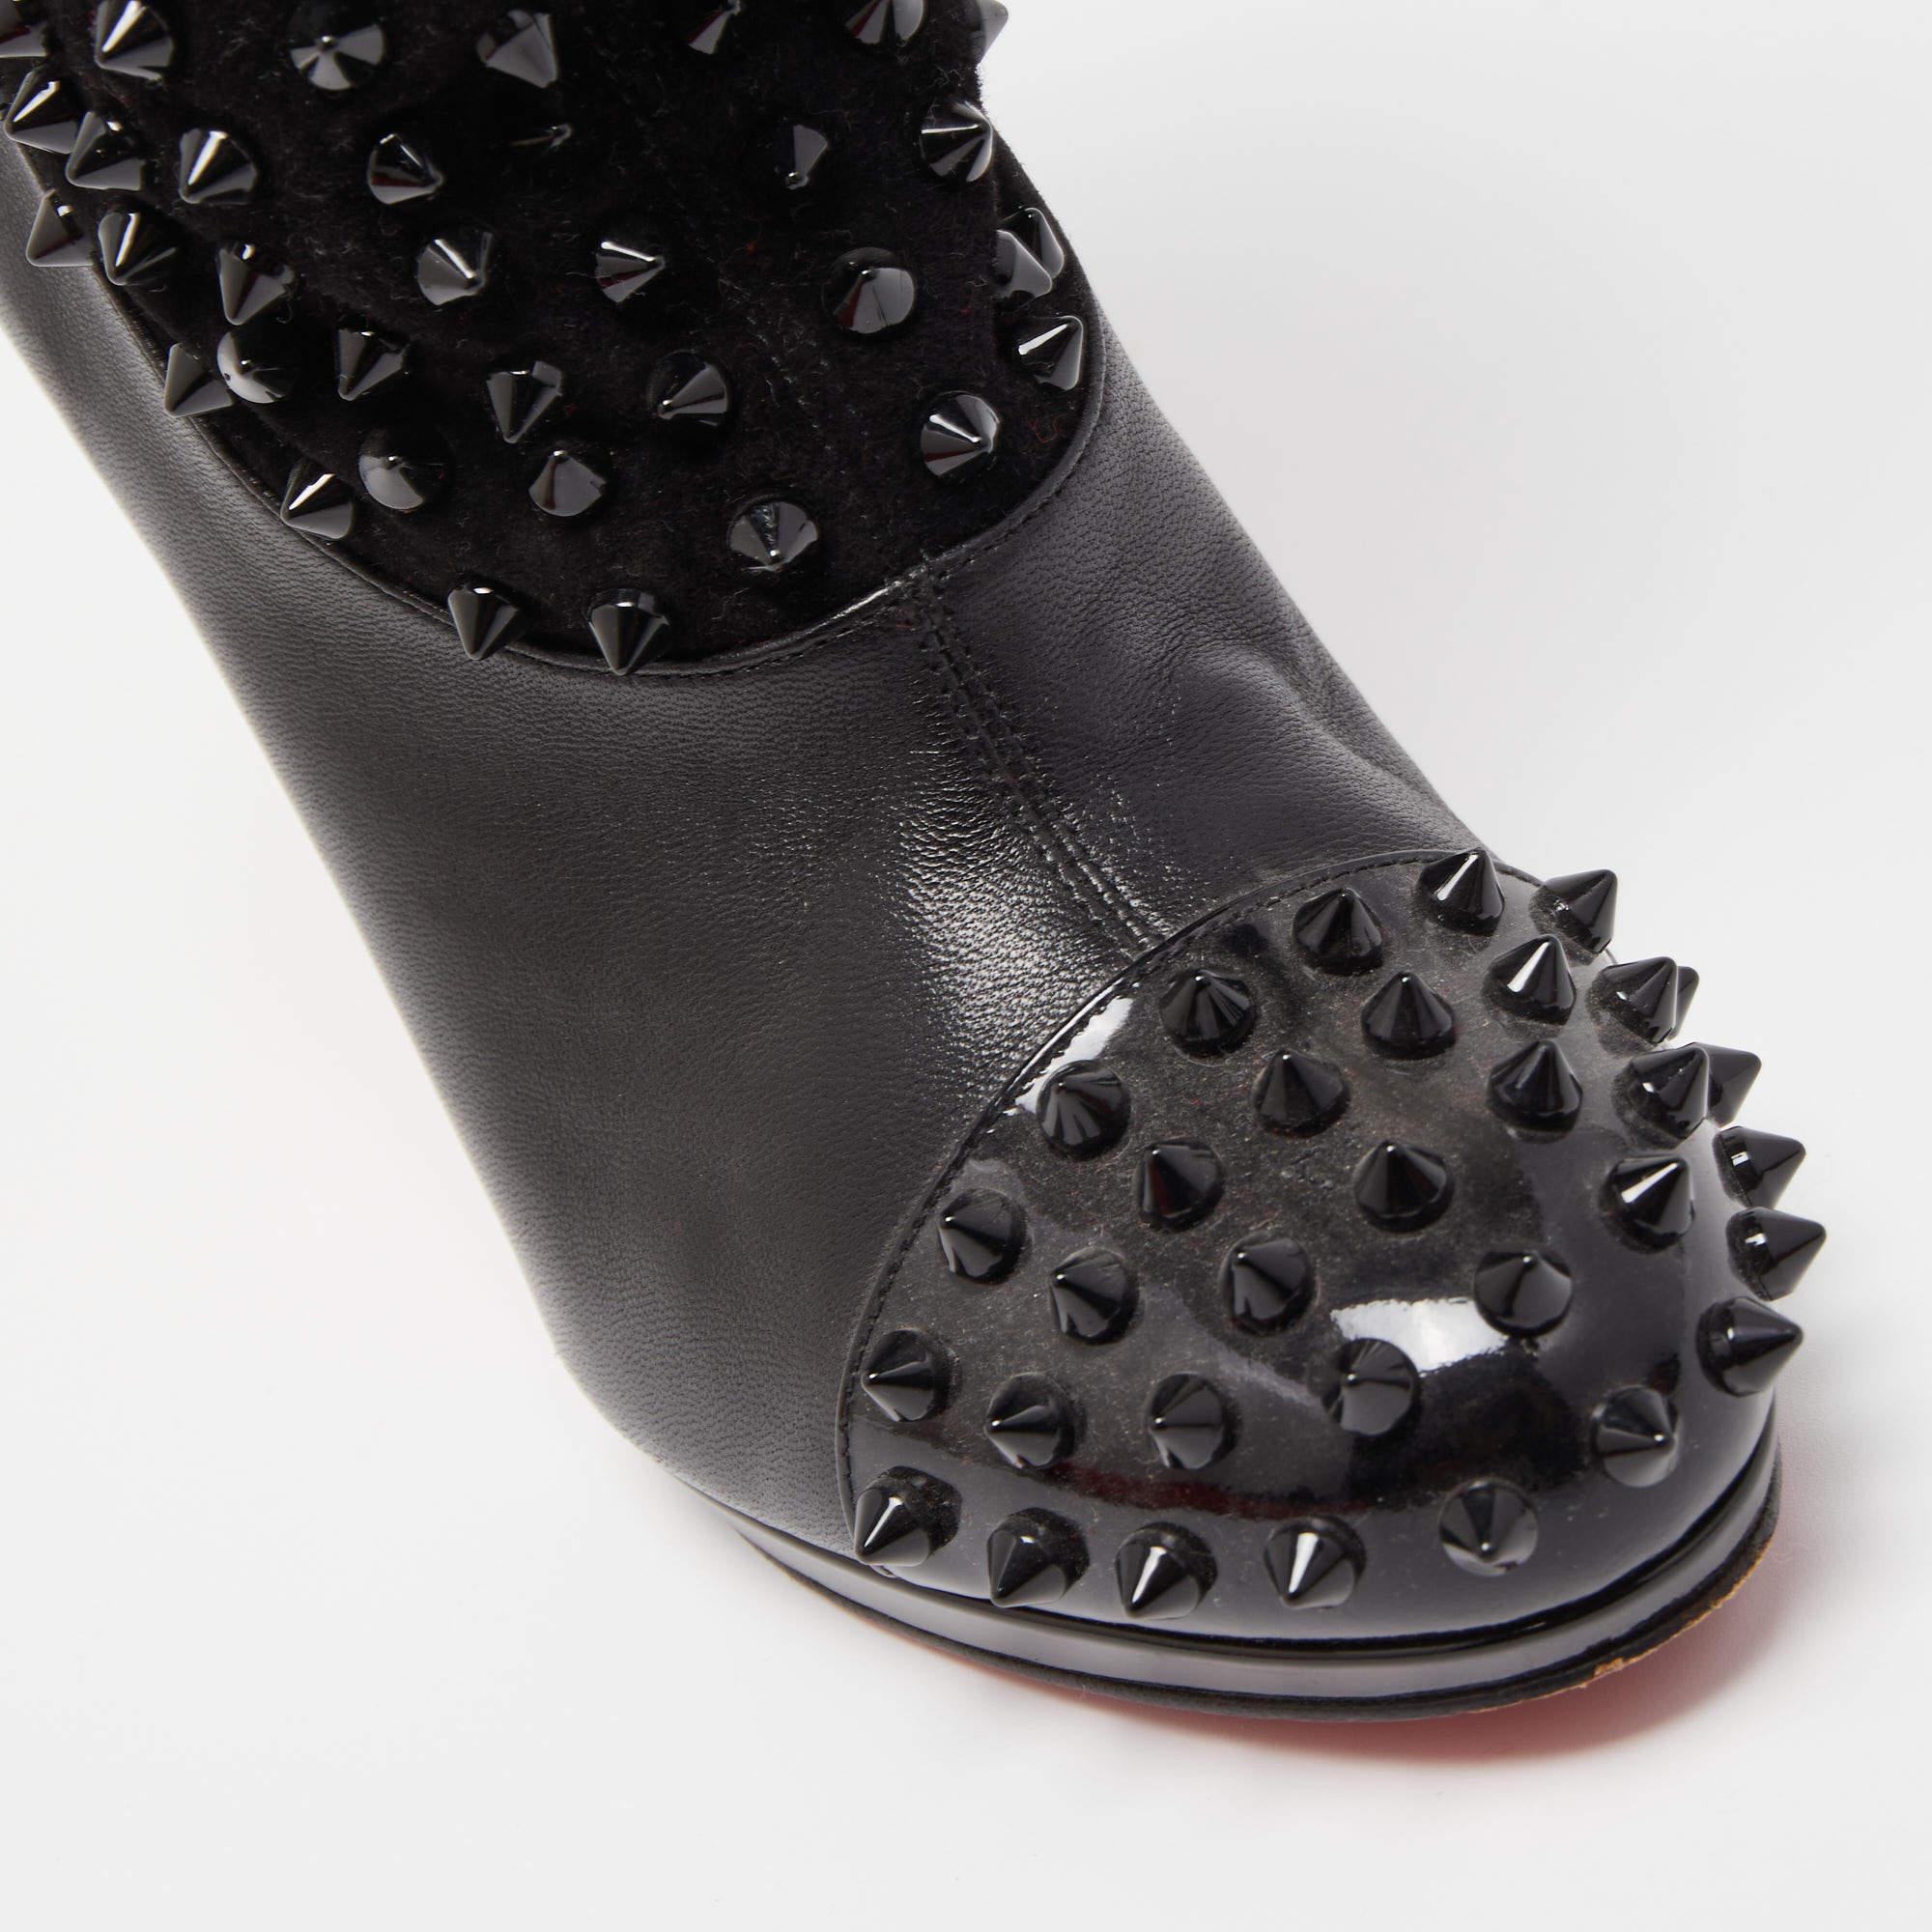 Christian Louboutin Black Patent Leather and Suede Spike Wars Ankle Boots  In Good Condition For Sale In Dubai, Al Qouz 2